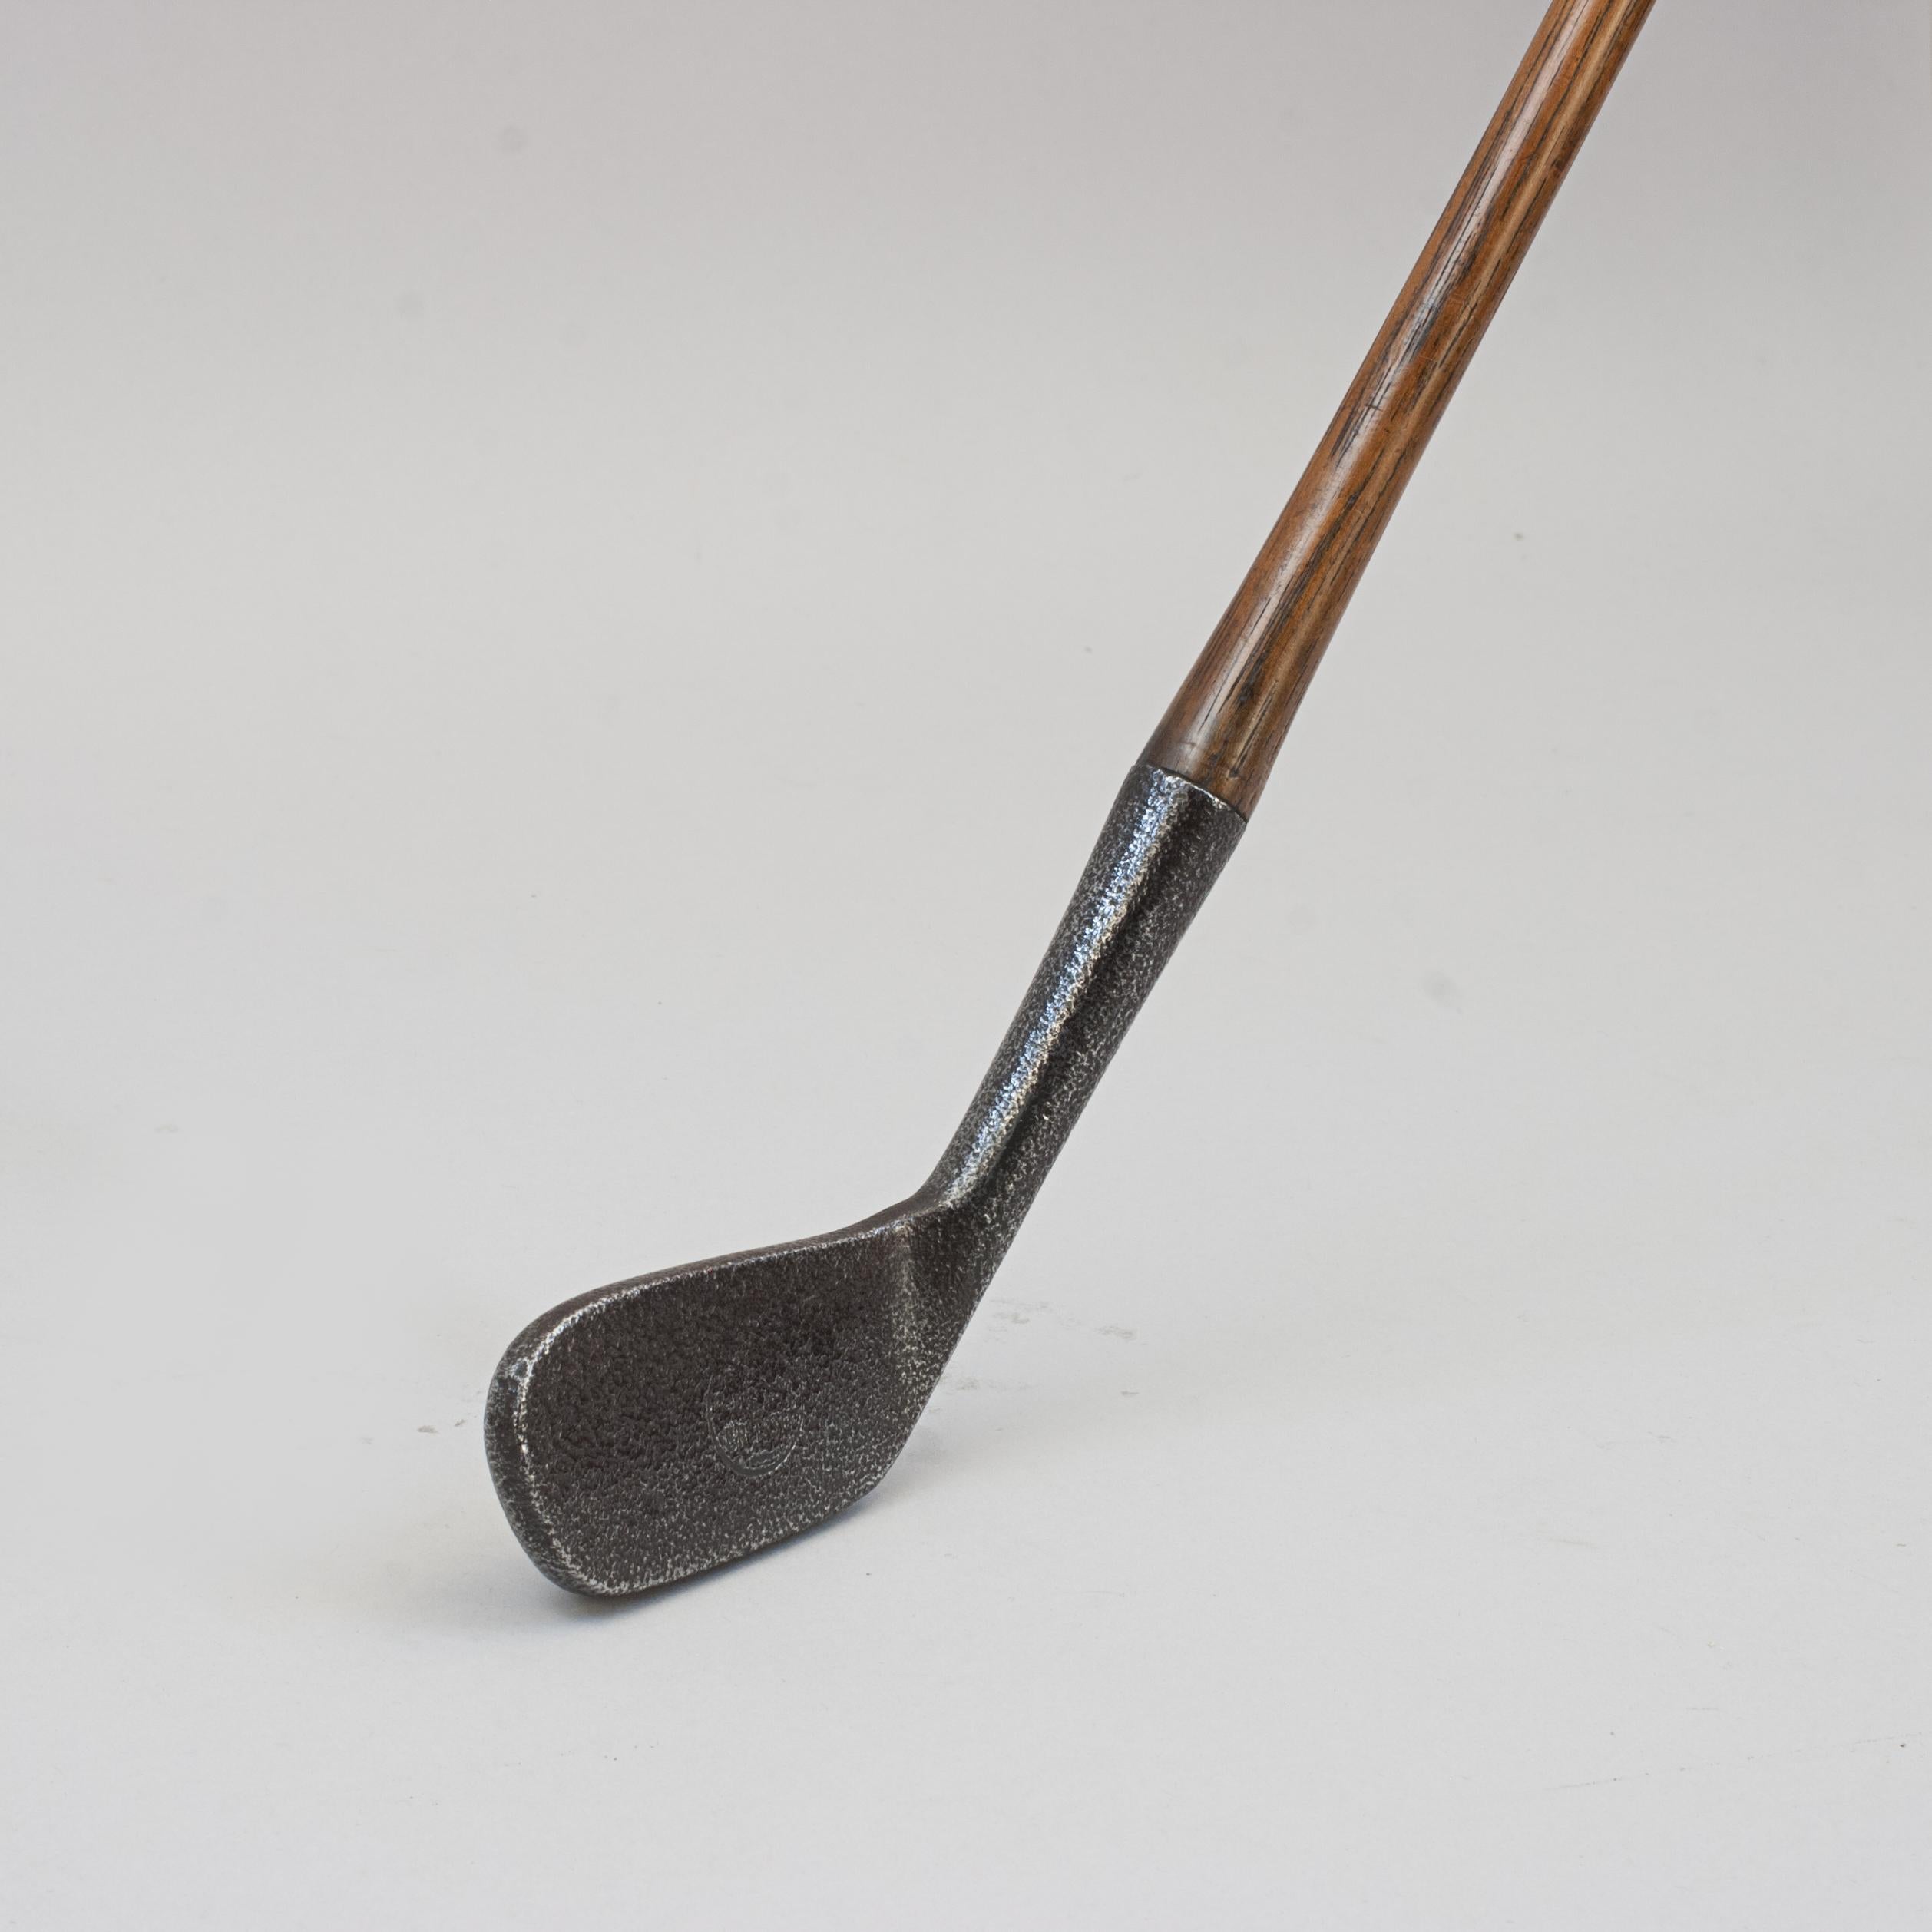 Unusual Driving Iron Golf Club, The Nipper 
This rare and unusual hickory shafted iron 'The Nipper', has a smooth face, bulbous weighted back, hickory shaft and suede leather grip. The rear of the head stamped 'D. Myles, Dundee. 7 Nipper', the face